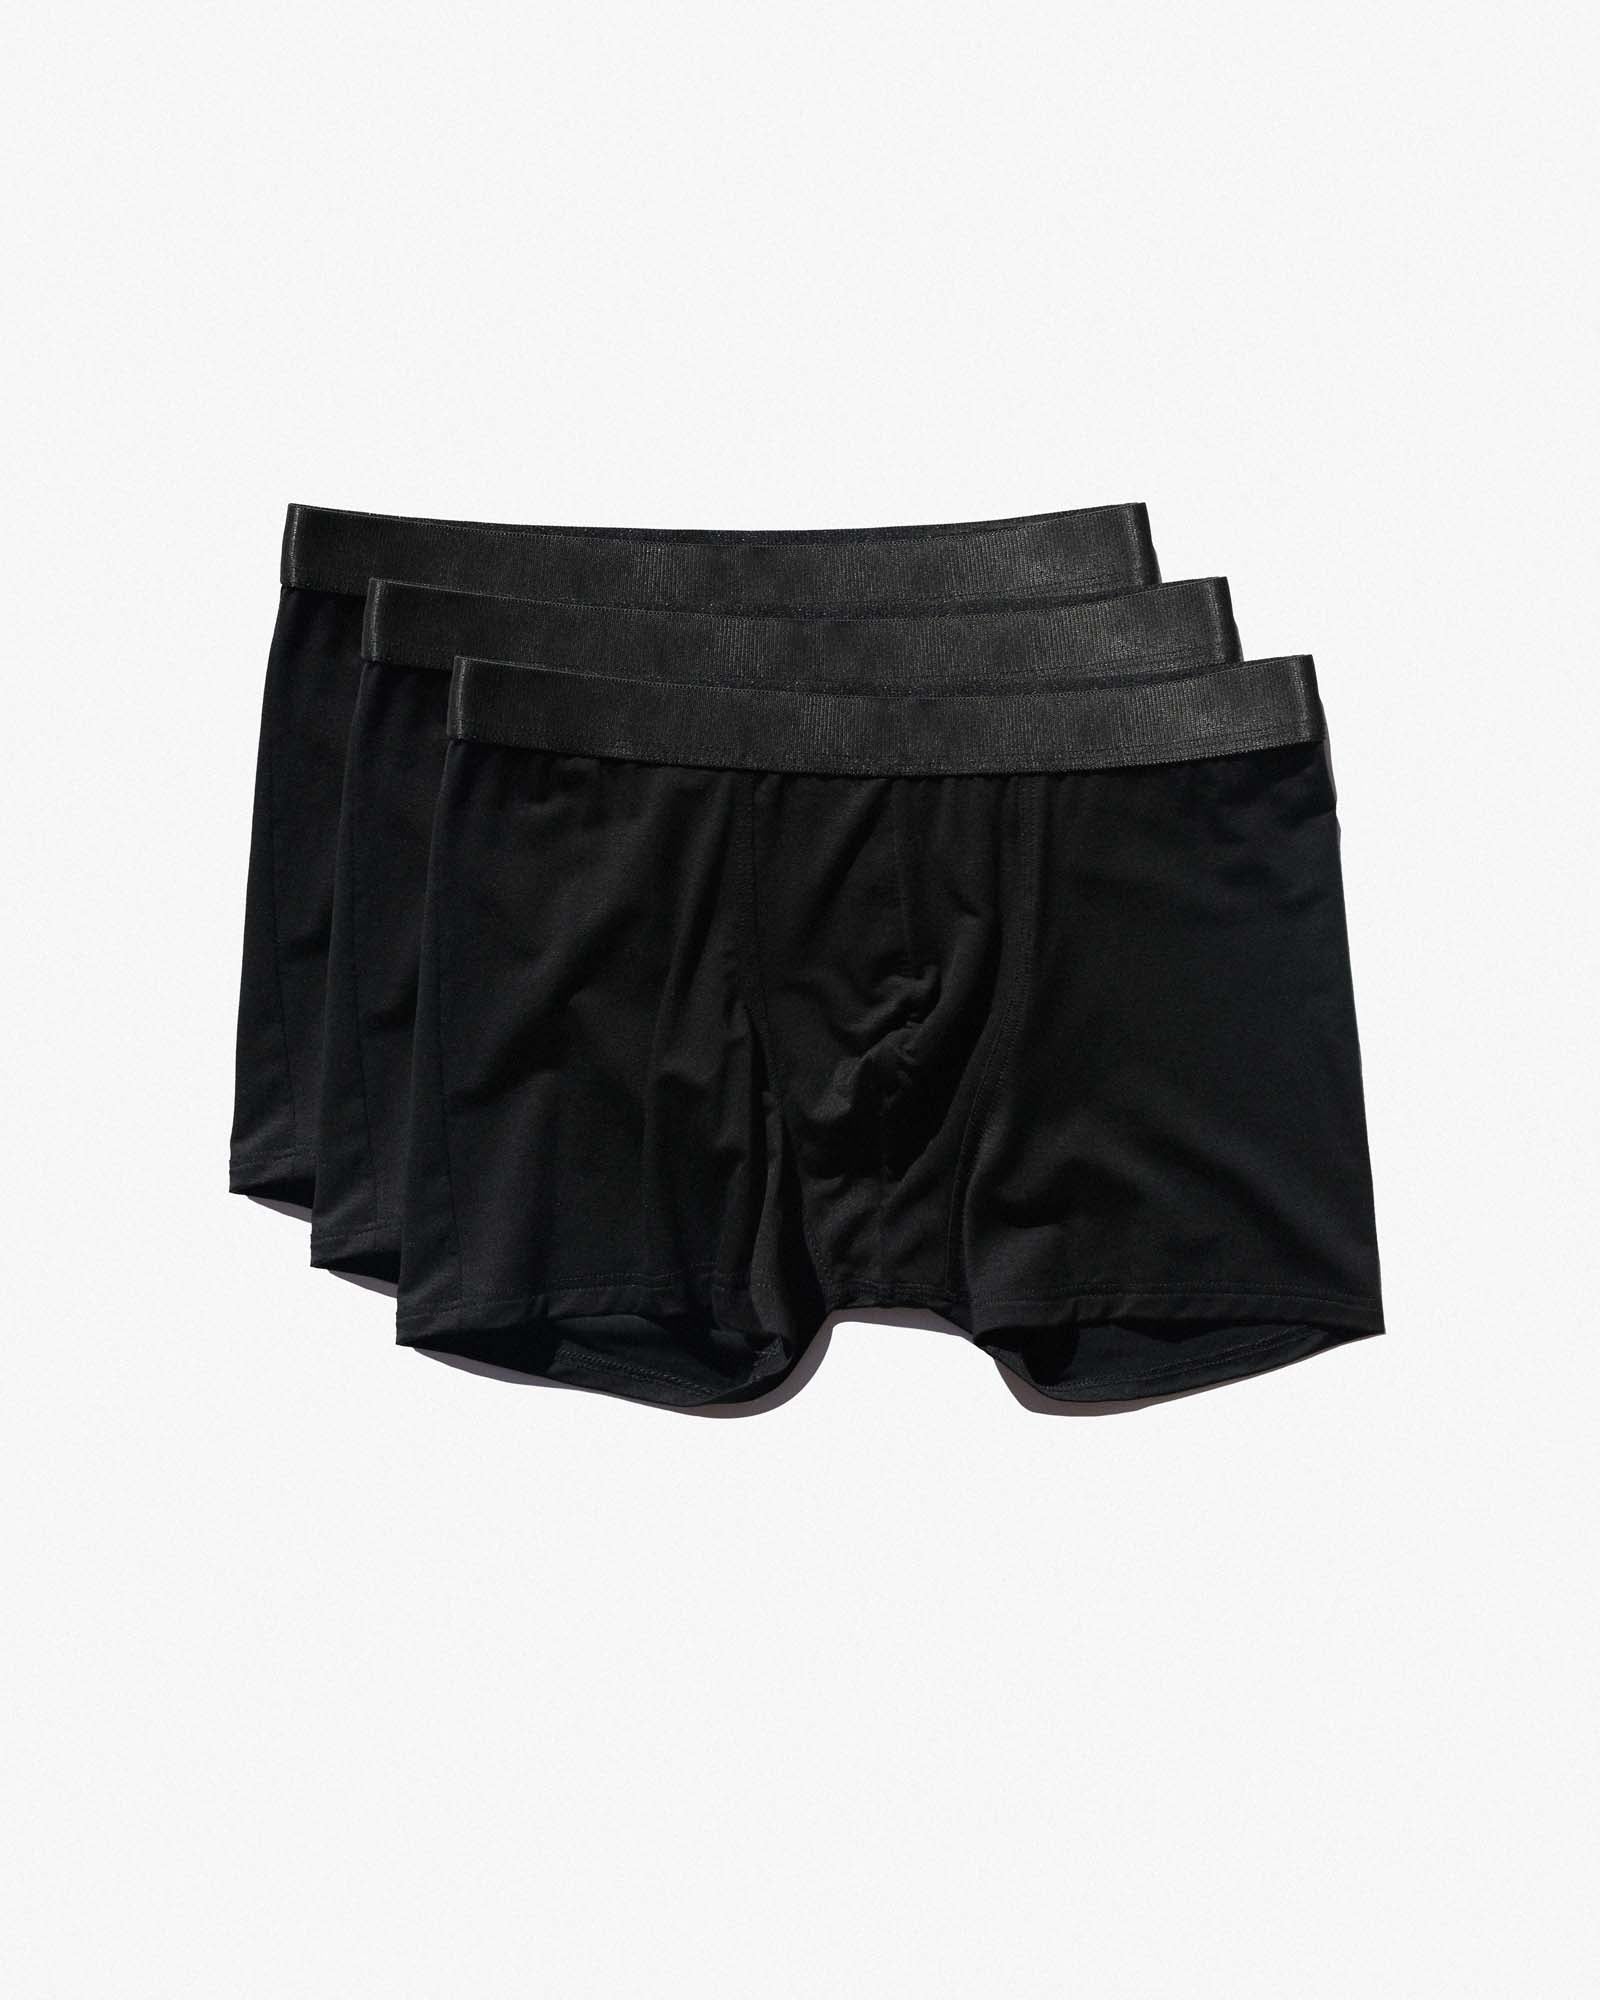 Claim your FREE pair of the UK's best selling boxer shorts